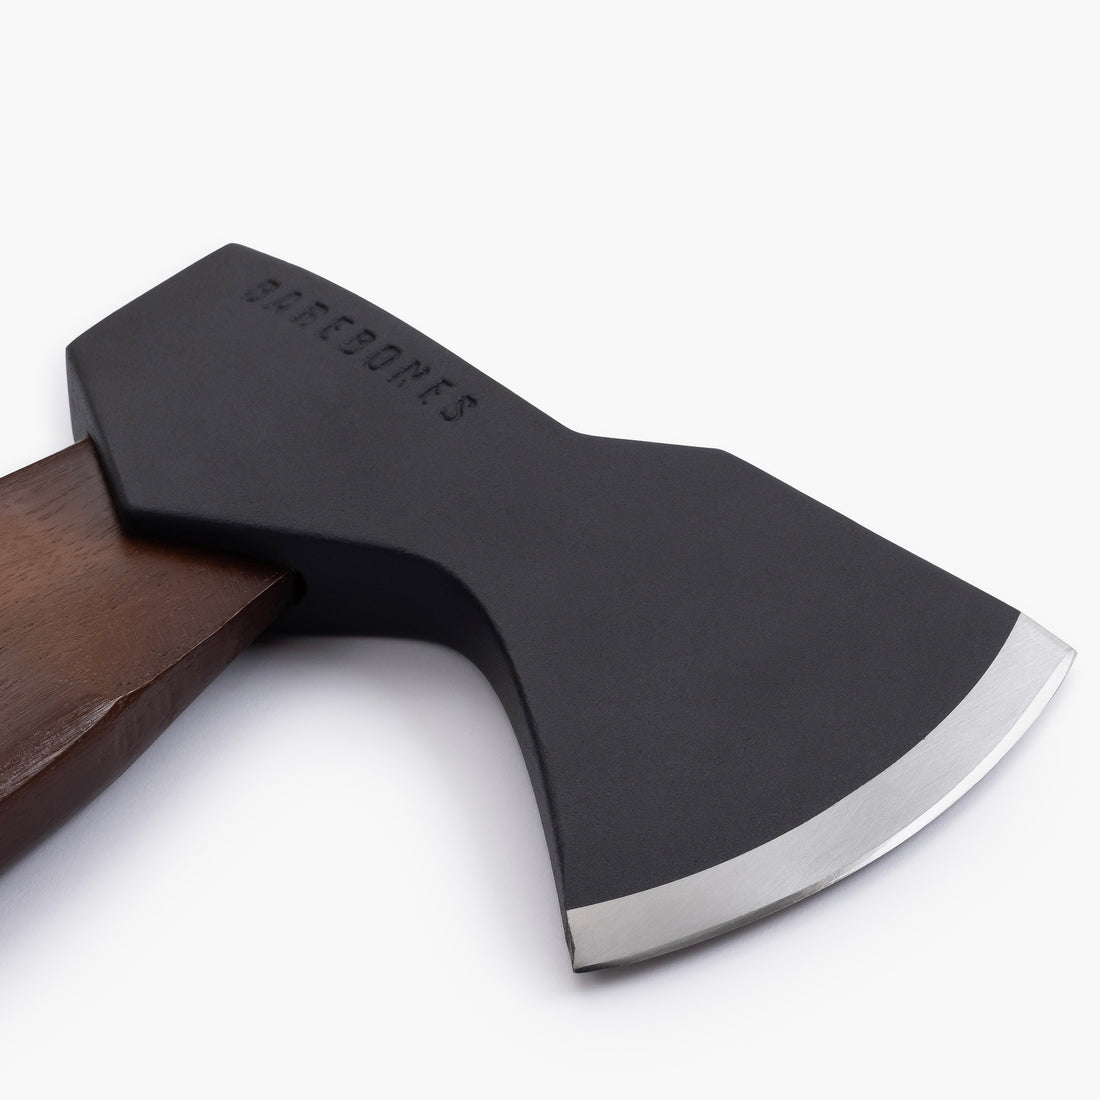 Discover Our Unique Carbon Cooking Axe Light Brown Leather